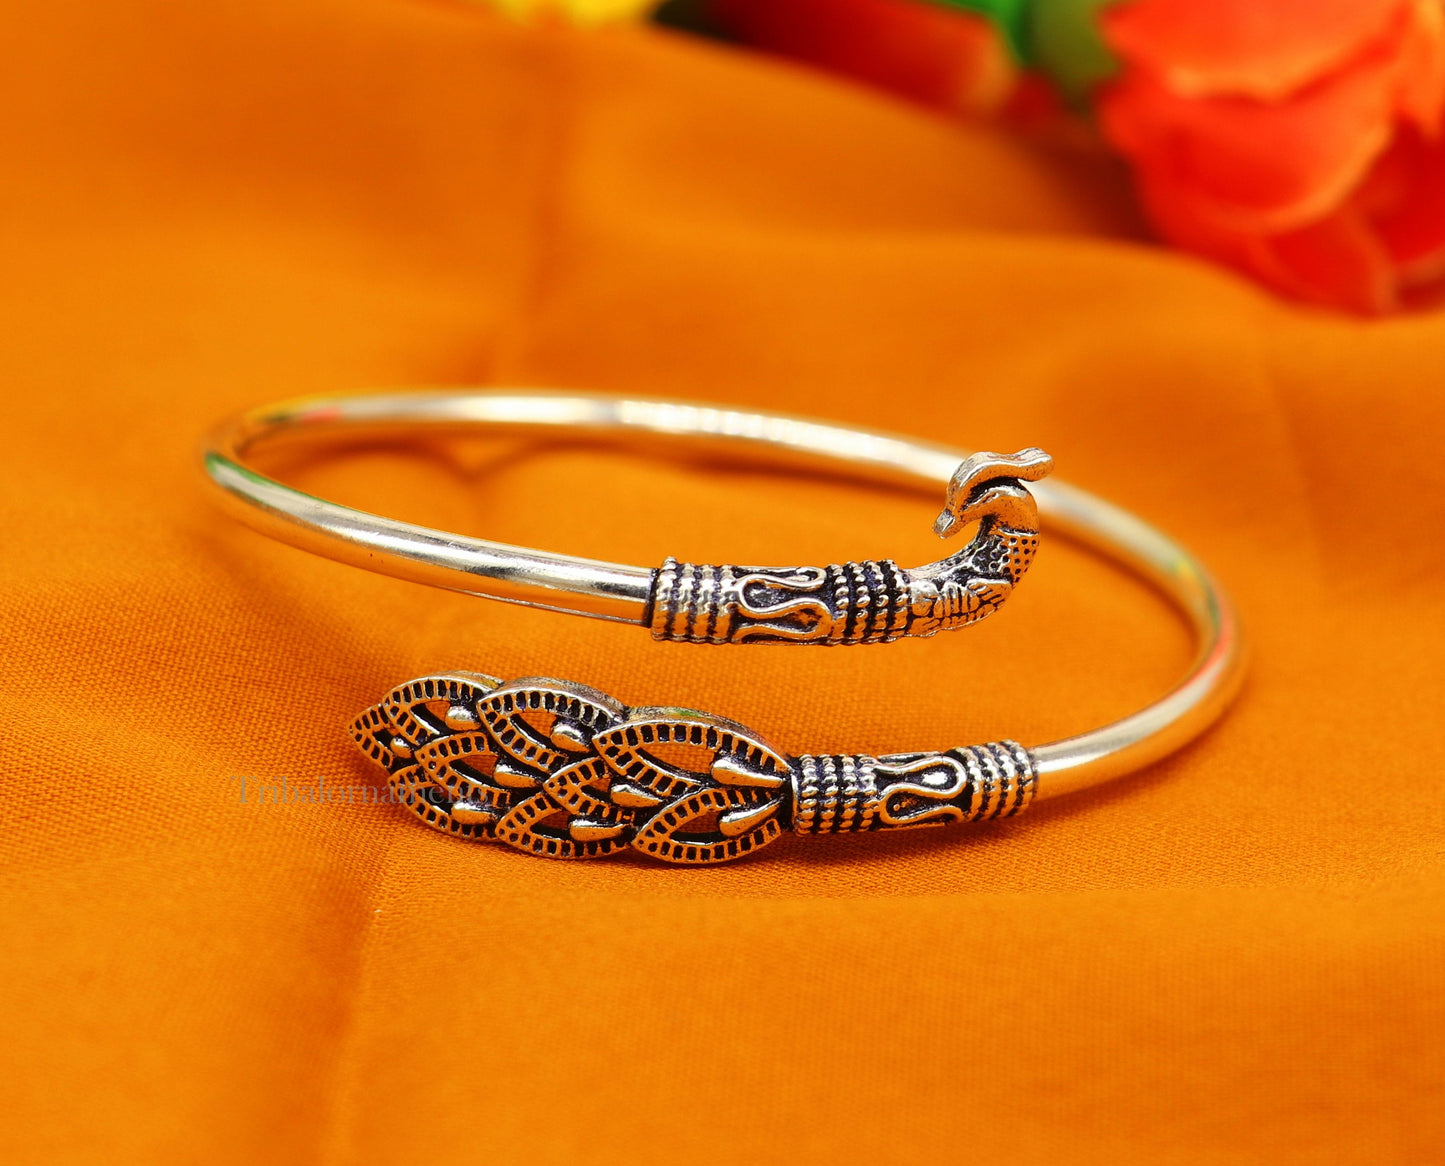 Peacock style 925 sterling silver exclusive design handmade bangle bracelet, easy to plug with your wrist, pure silver kada jewelry nba199 - TRIBAL ORNAMENTS